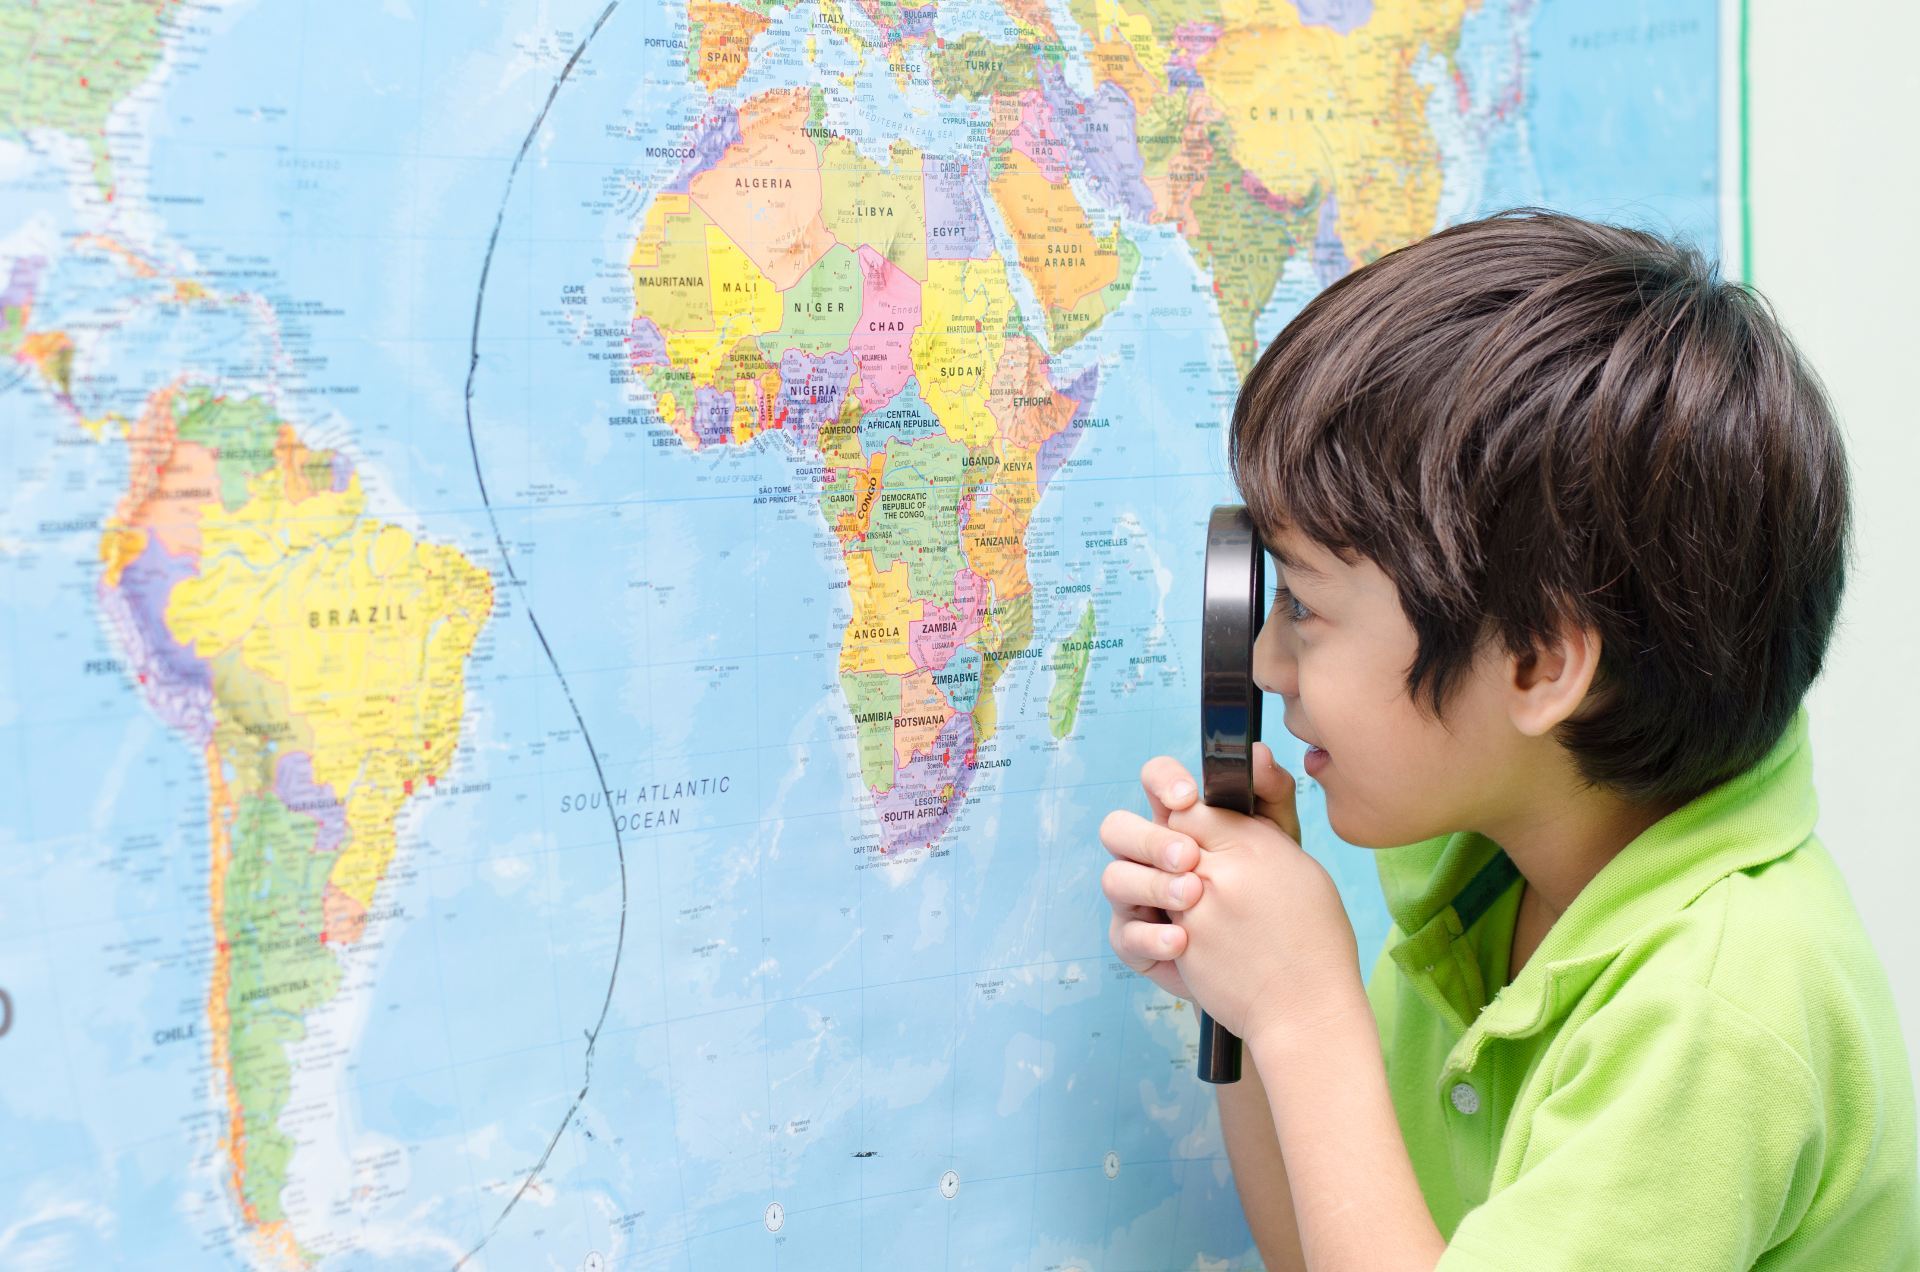 Boy looking at world map with magnifying glass Edublogs